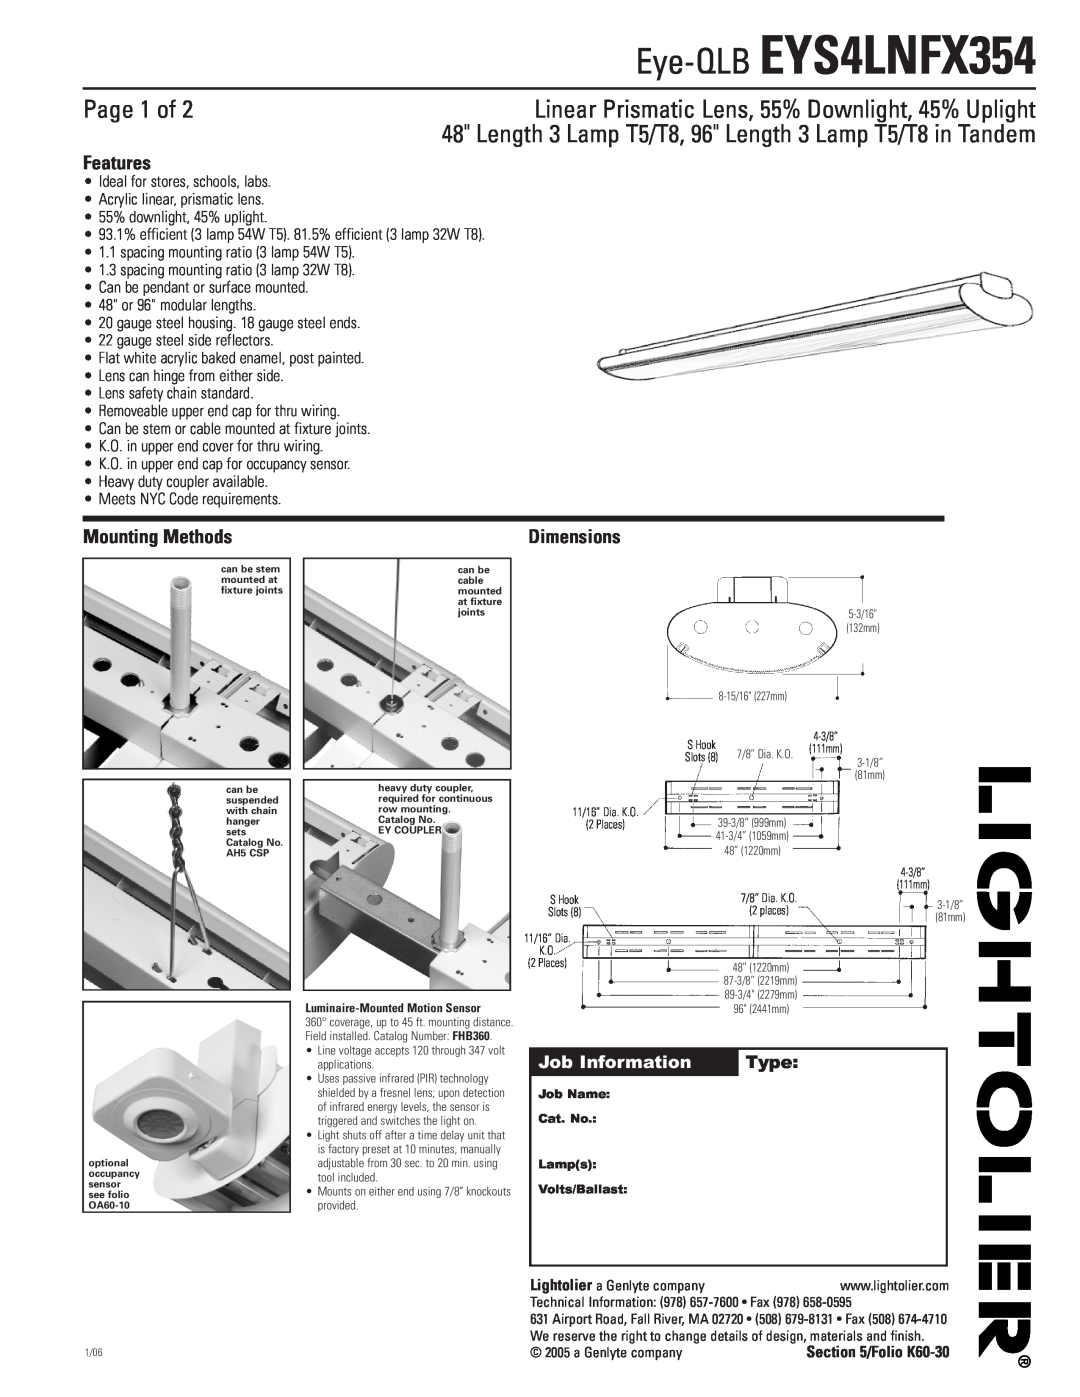 Lightolier dimensions Eye-QLB EYS4LNFX354, Page 1 of, Linear Prismatic Lens, 55% Downlight, 45% Uplight, Features, Type 